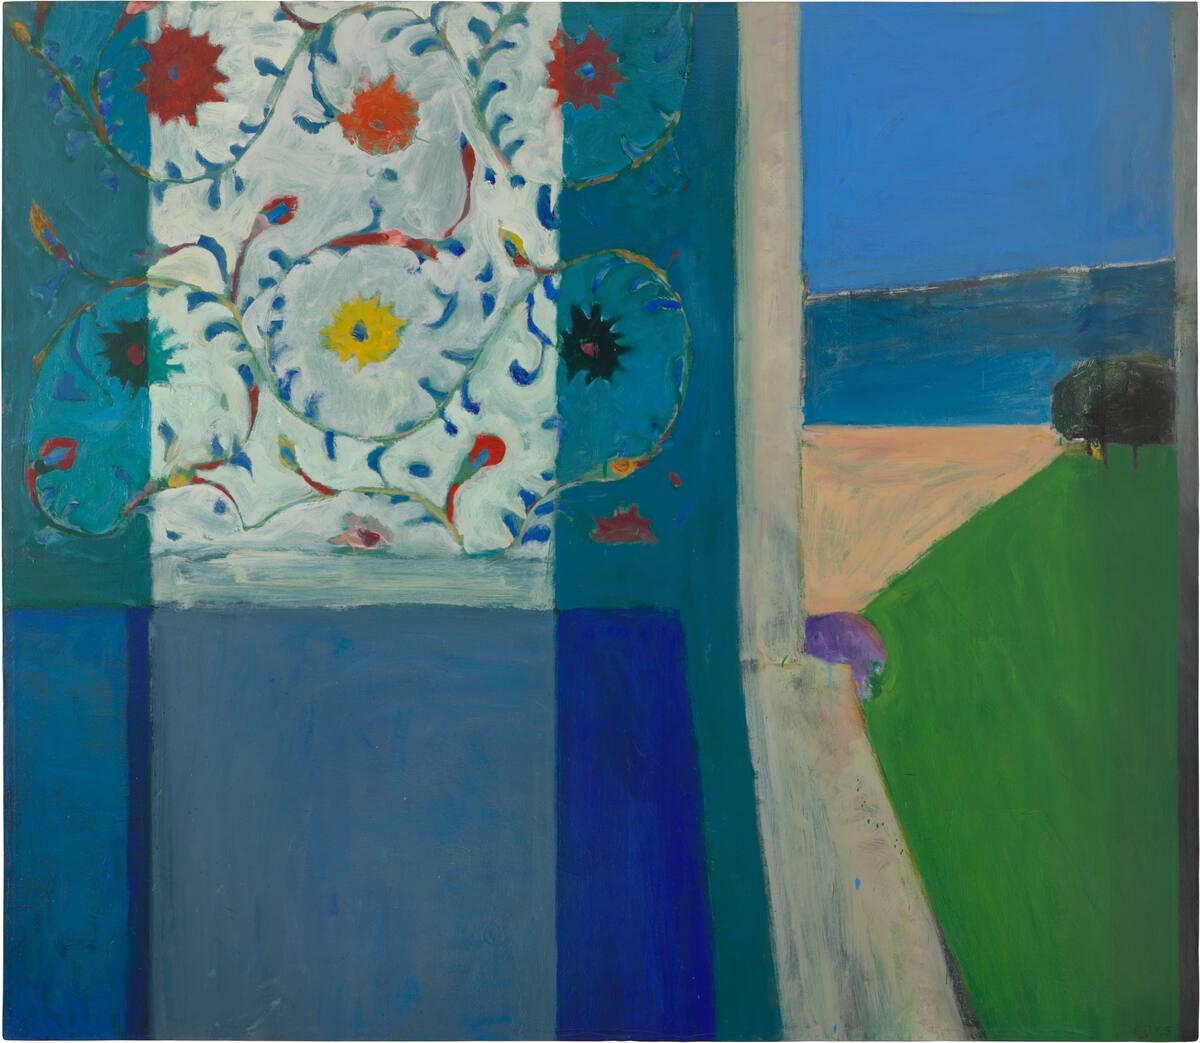 “Recollections of a Visit to Leningrad” by Richard Diebenkorn